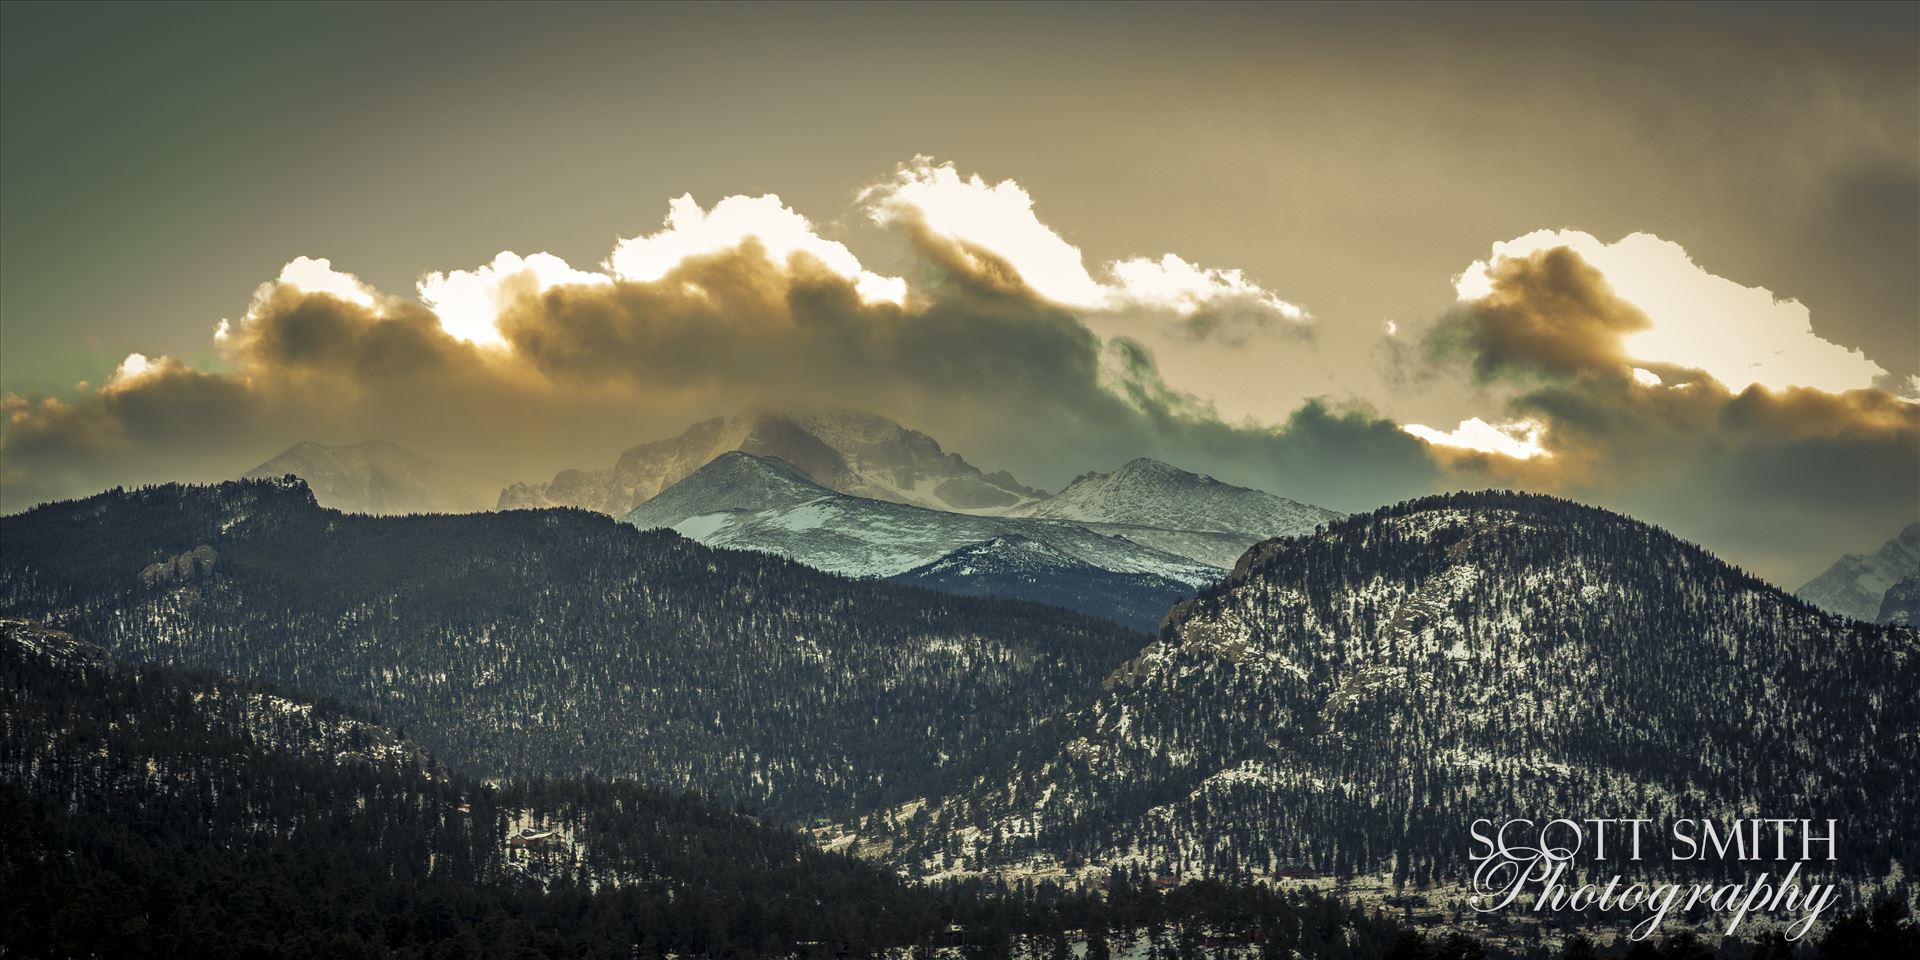 Sunset from Estes - The sun sets over peaks in the Rocky Mountain National Park, as seen from near the famous Stanley Hotel in Estes Park. by Scott Smith Photos